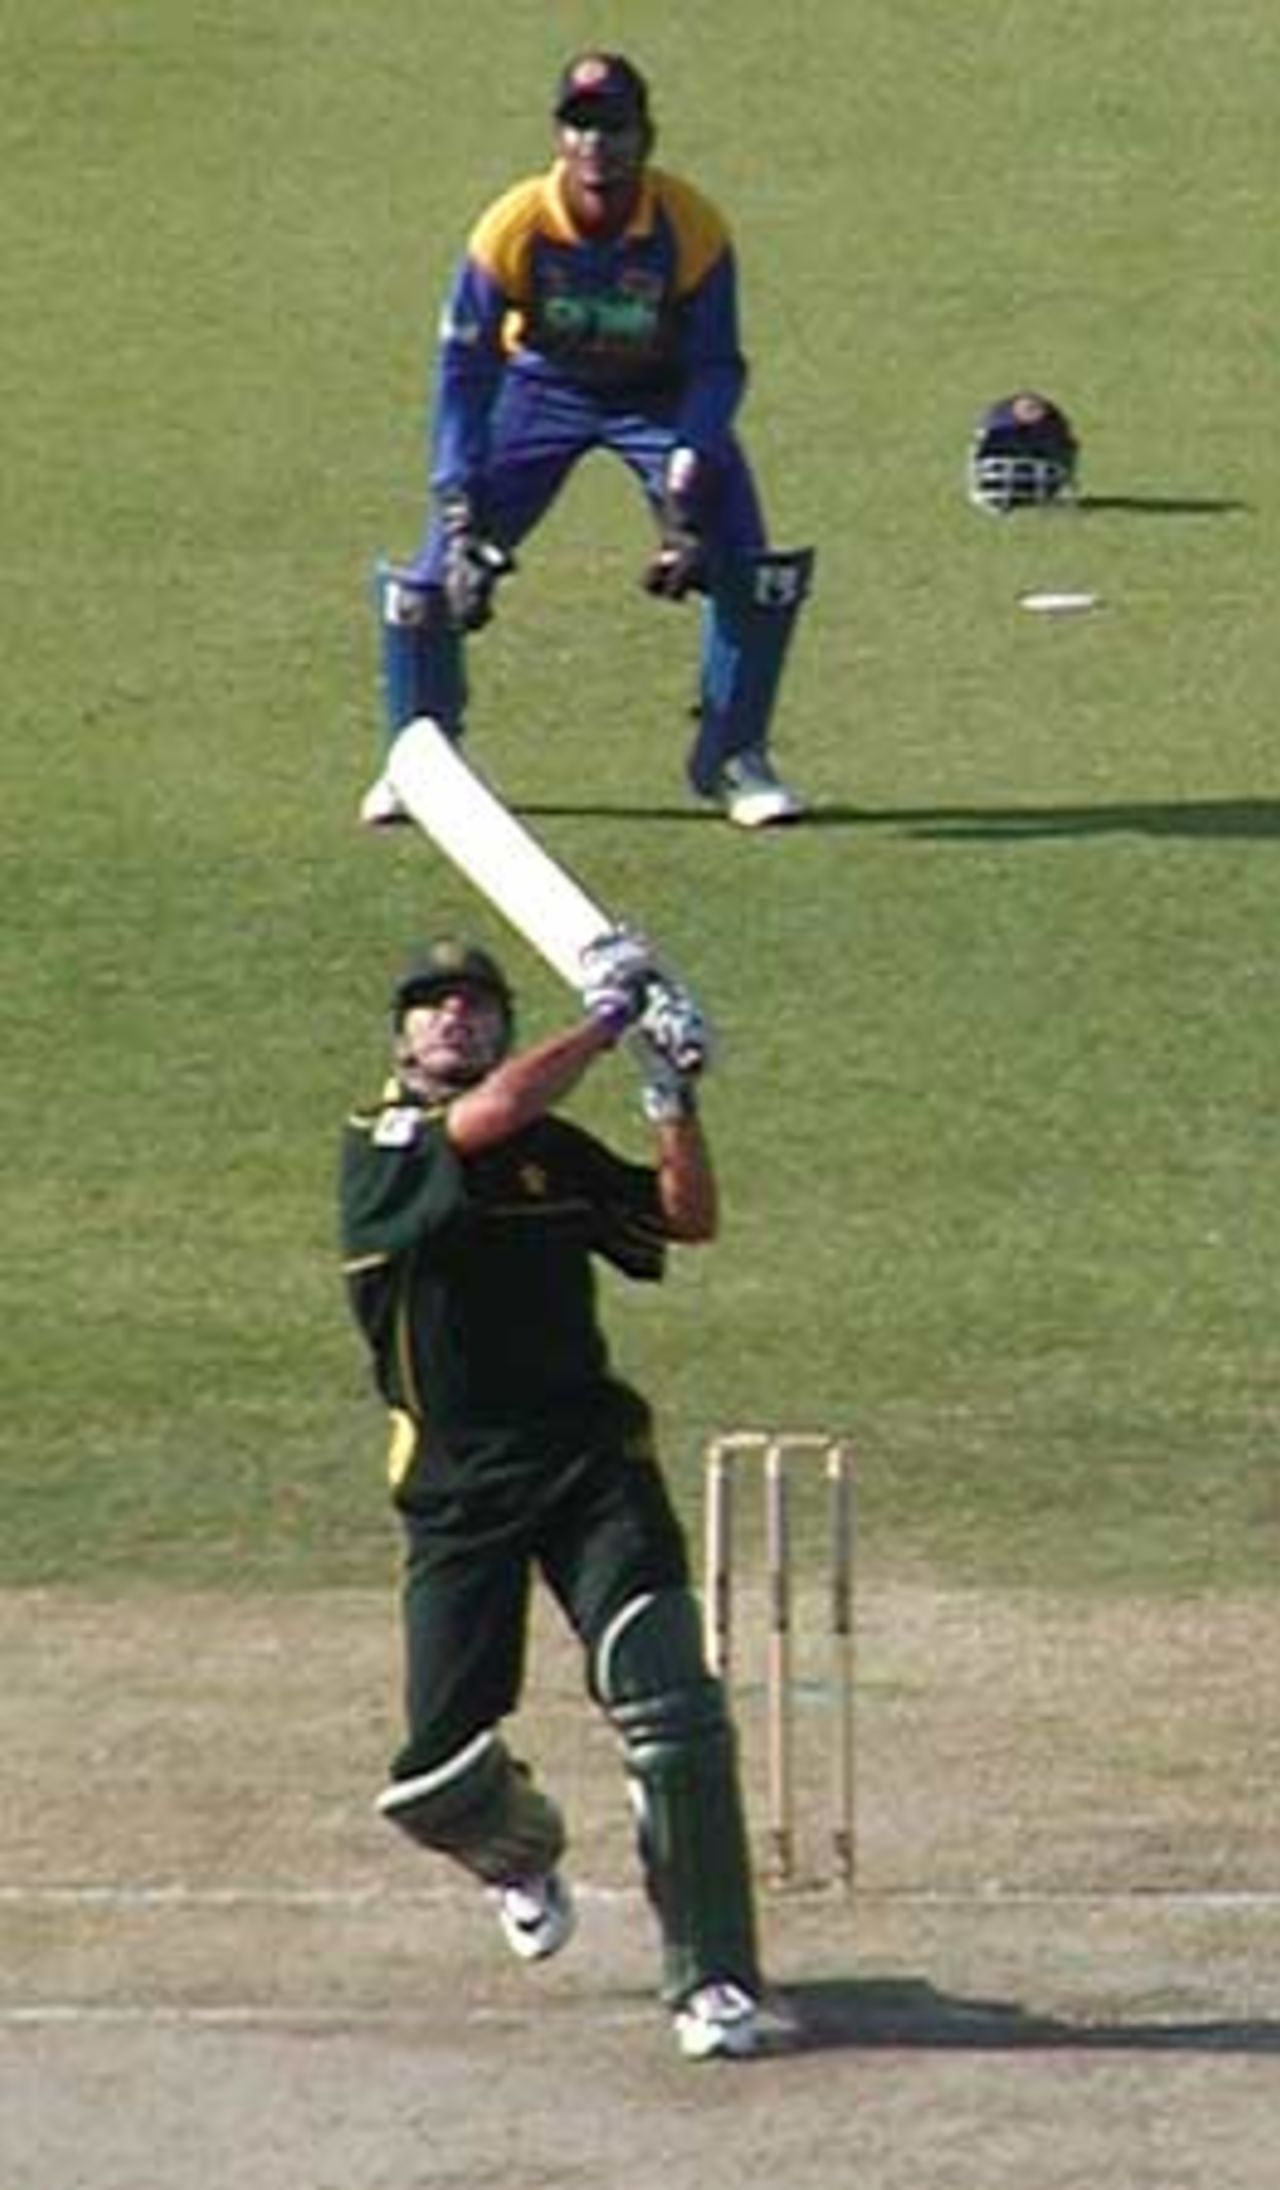 Afridi tries one too many and is caught out, Morocco Cup, 4th ODI at Tangiers, Pakistan v Sri Lanka, 17 Aug 2002